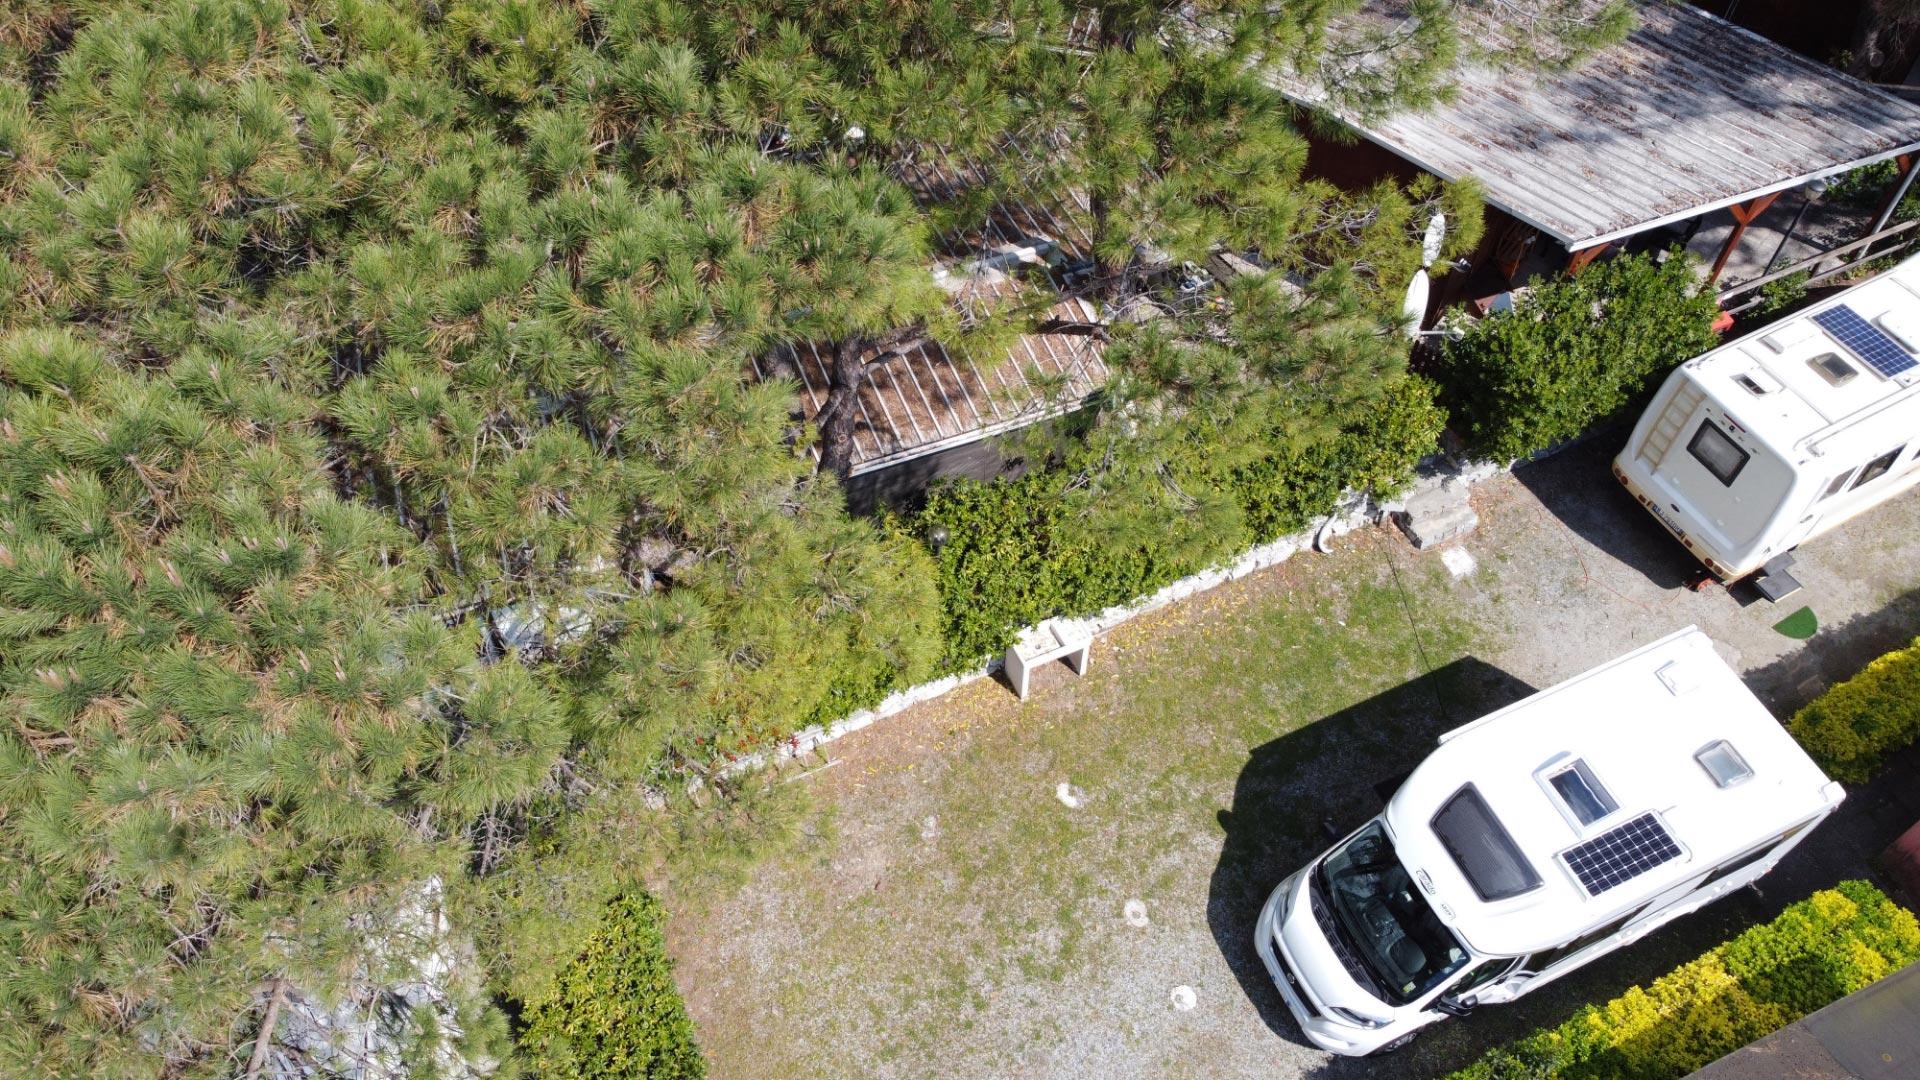 Aerial view of RVs parked near a house with trees and bushes.